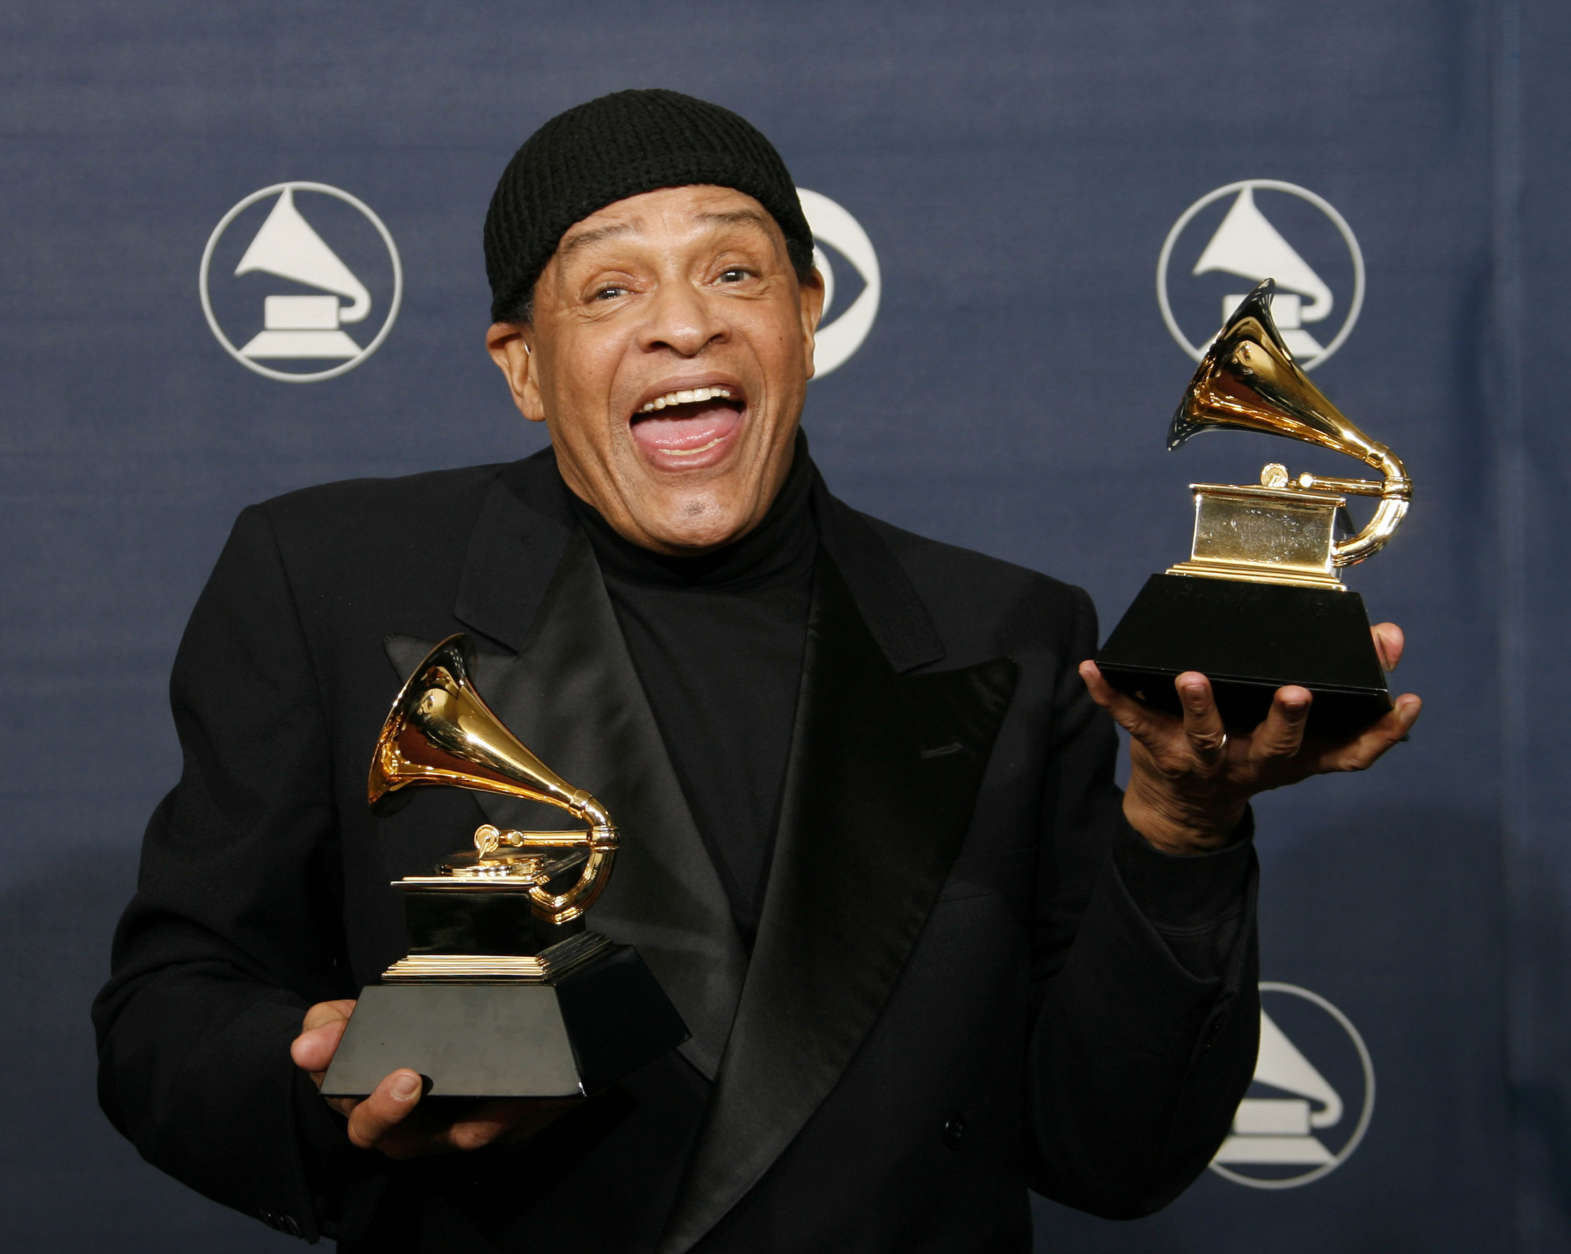 FILE - In this Sunday, Feb. 11, 2007, file photo, Al Jarreau poses with his awards for best pop instrumental performance for "Mornin'" and best traditional R&amp;B vocal performance for "God Bless the Child" at the 49th Annual Grammy Awards in Los Angeles. Jarreau died in a Los Angeles hospital early Sunday, Feb. 12, 2017, according to his official Twitter account and website. (AP Photo/Kevork Djansezian, File)